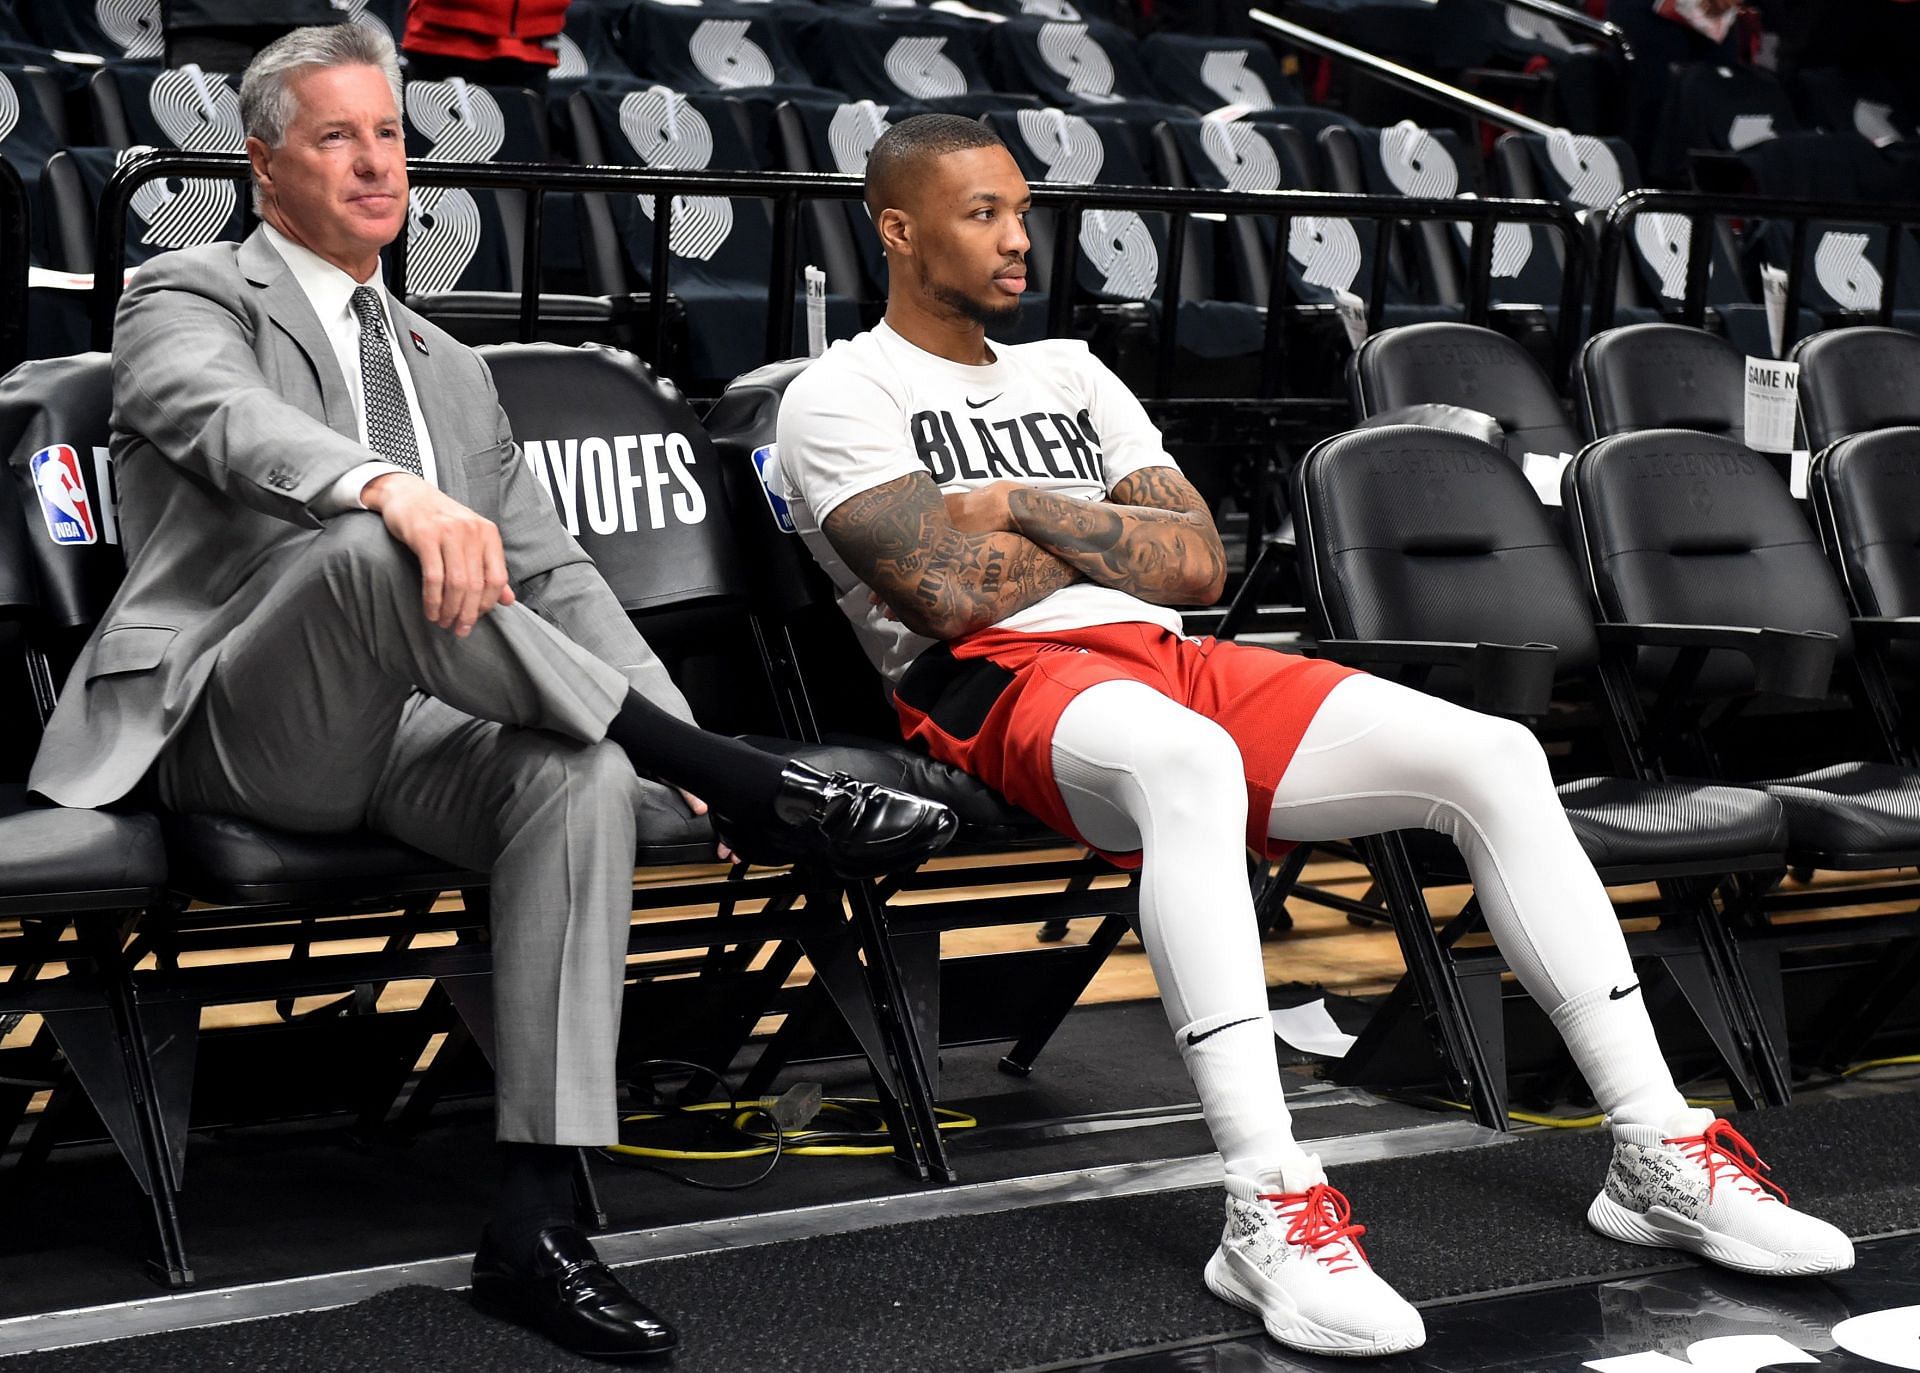 Neil Olshey and Damian Lillard before tip-off for Game 6 in the 2021 NBA playoffs first round